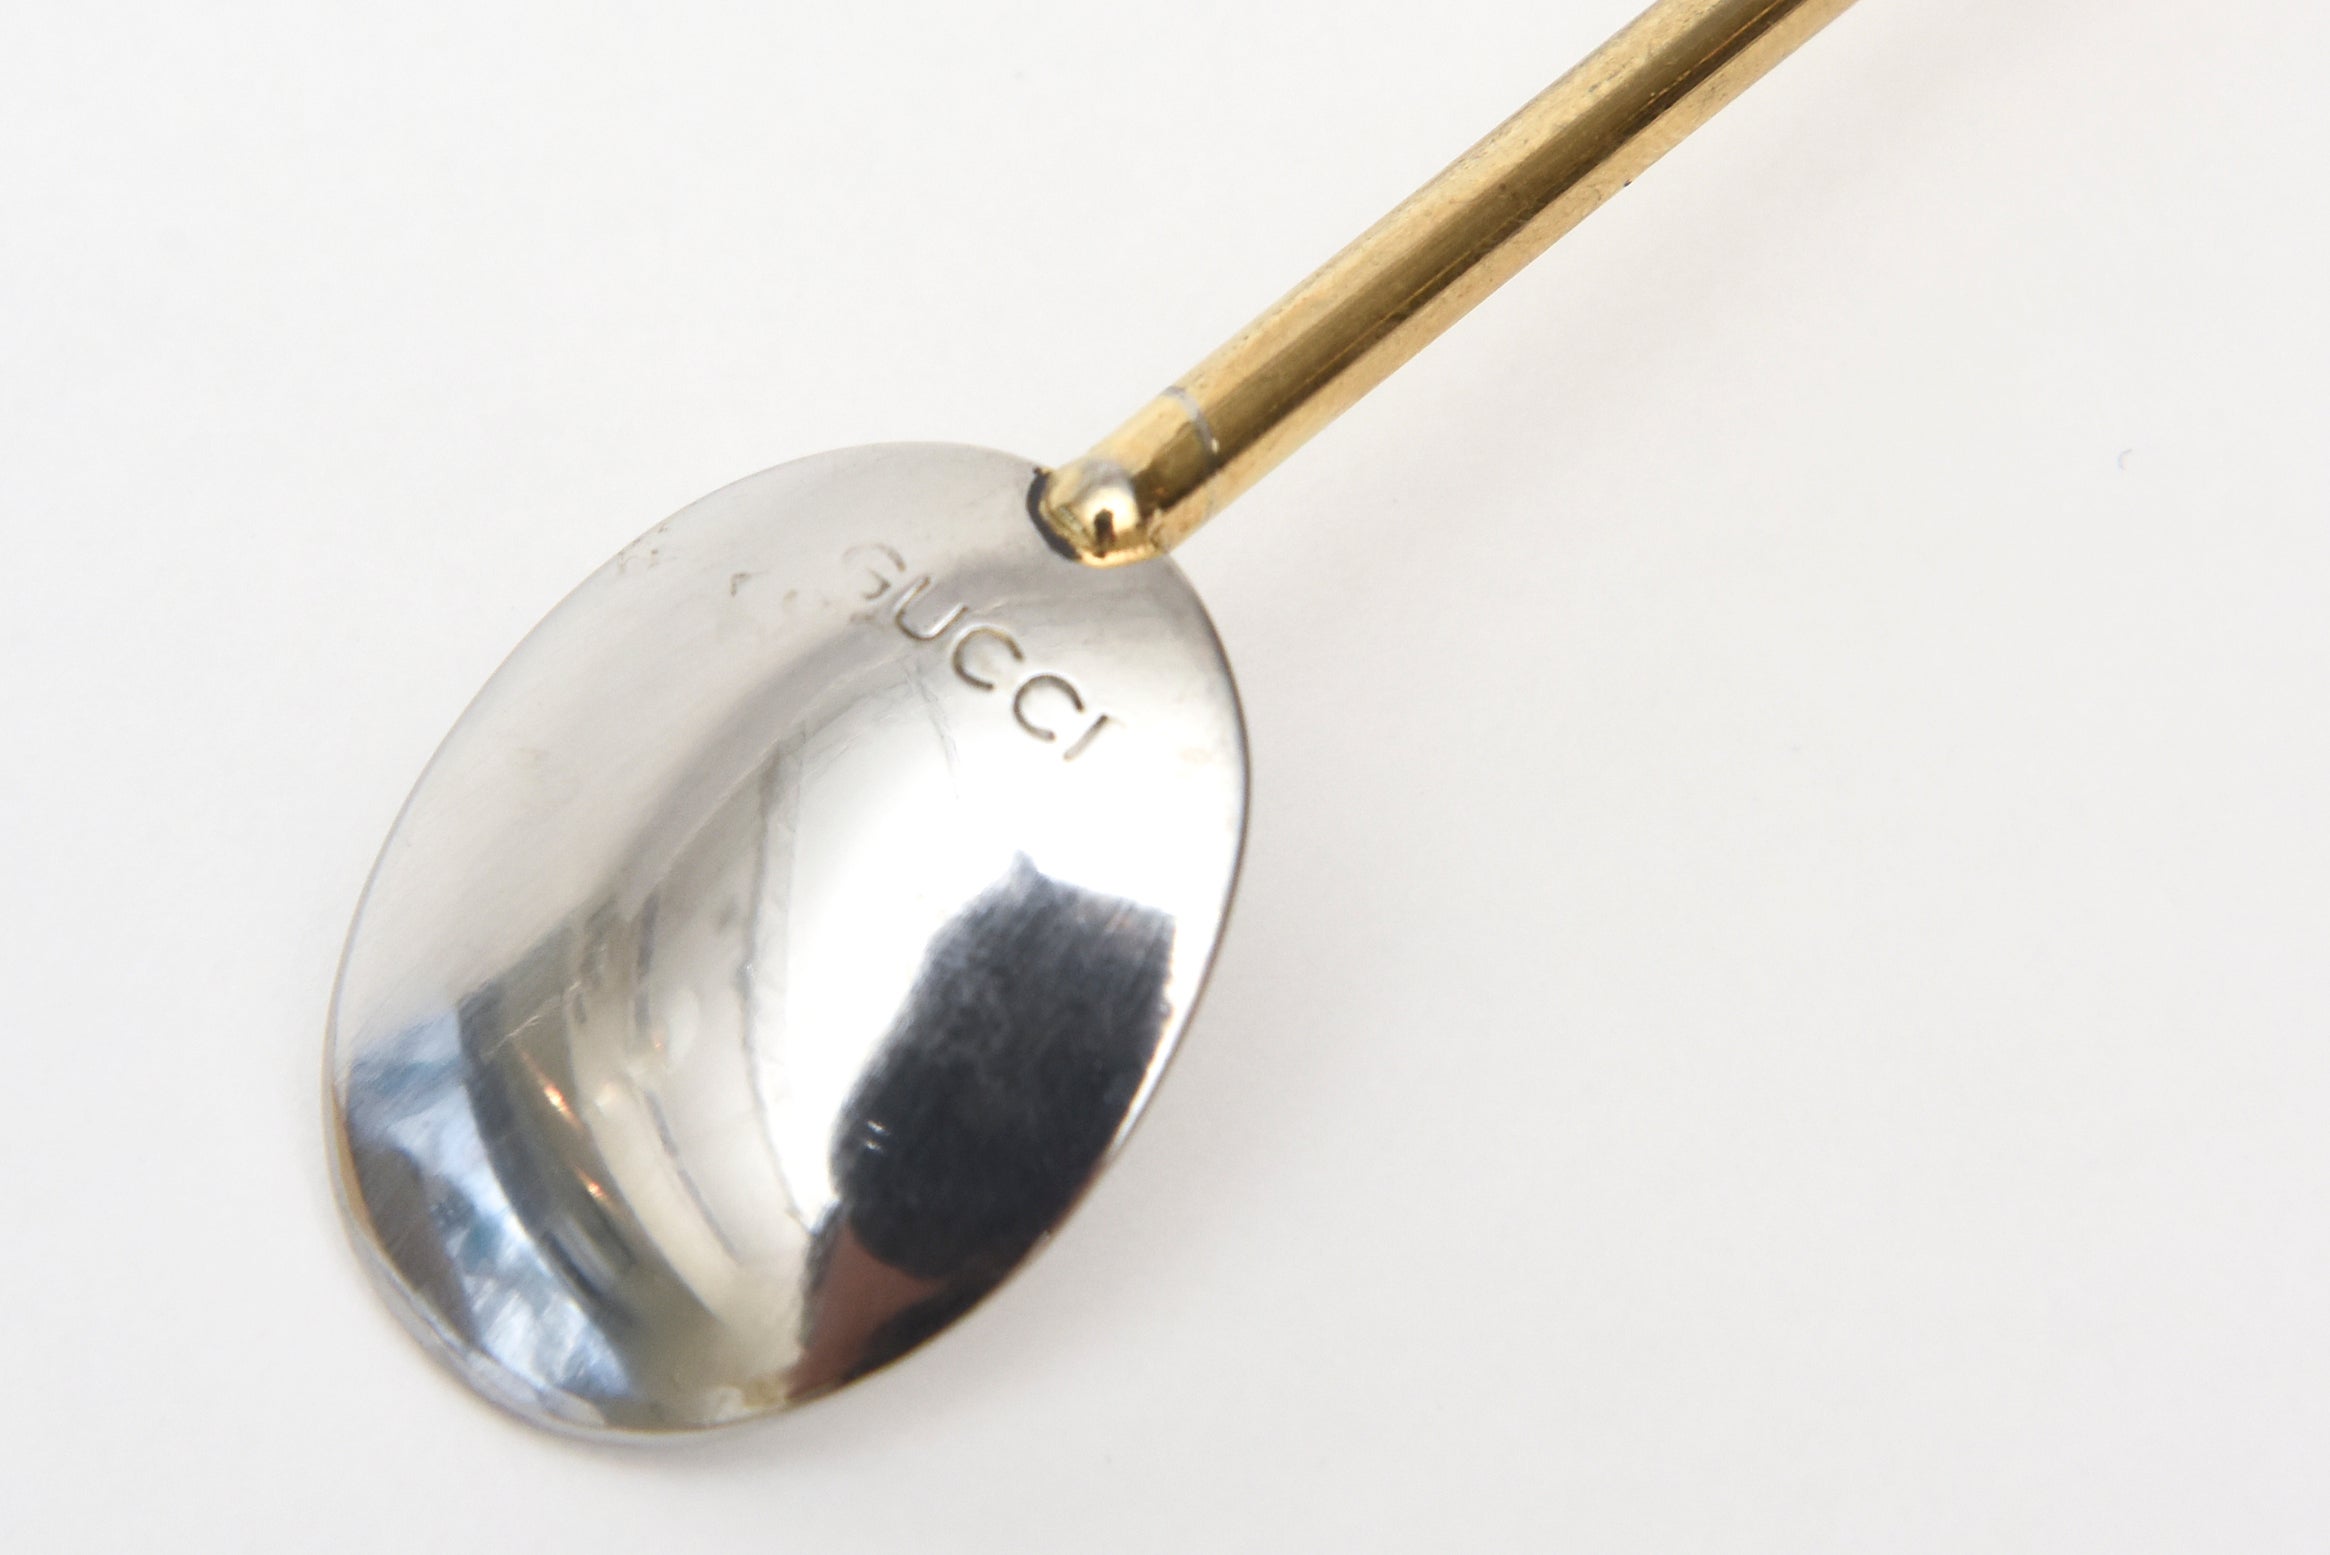 gucci gold spoons